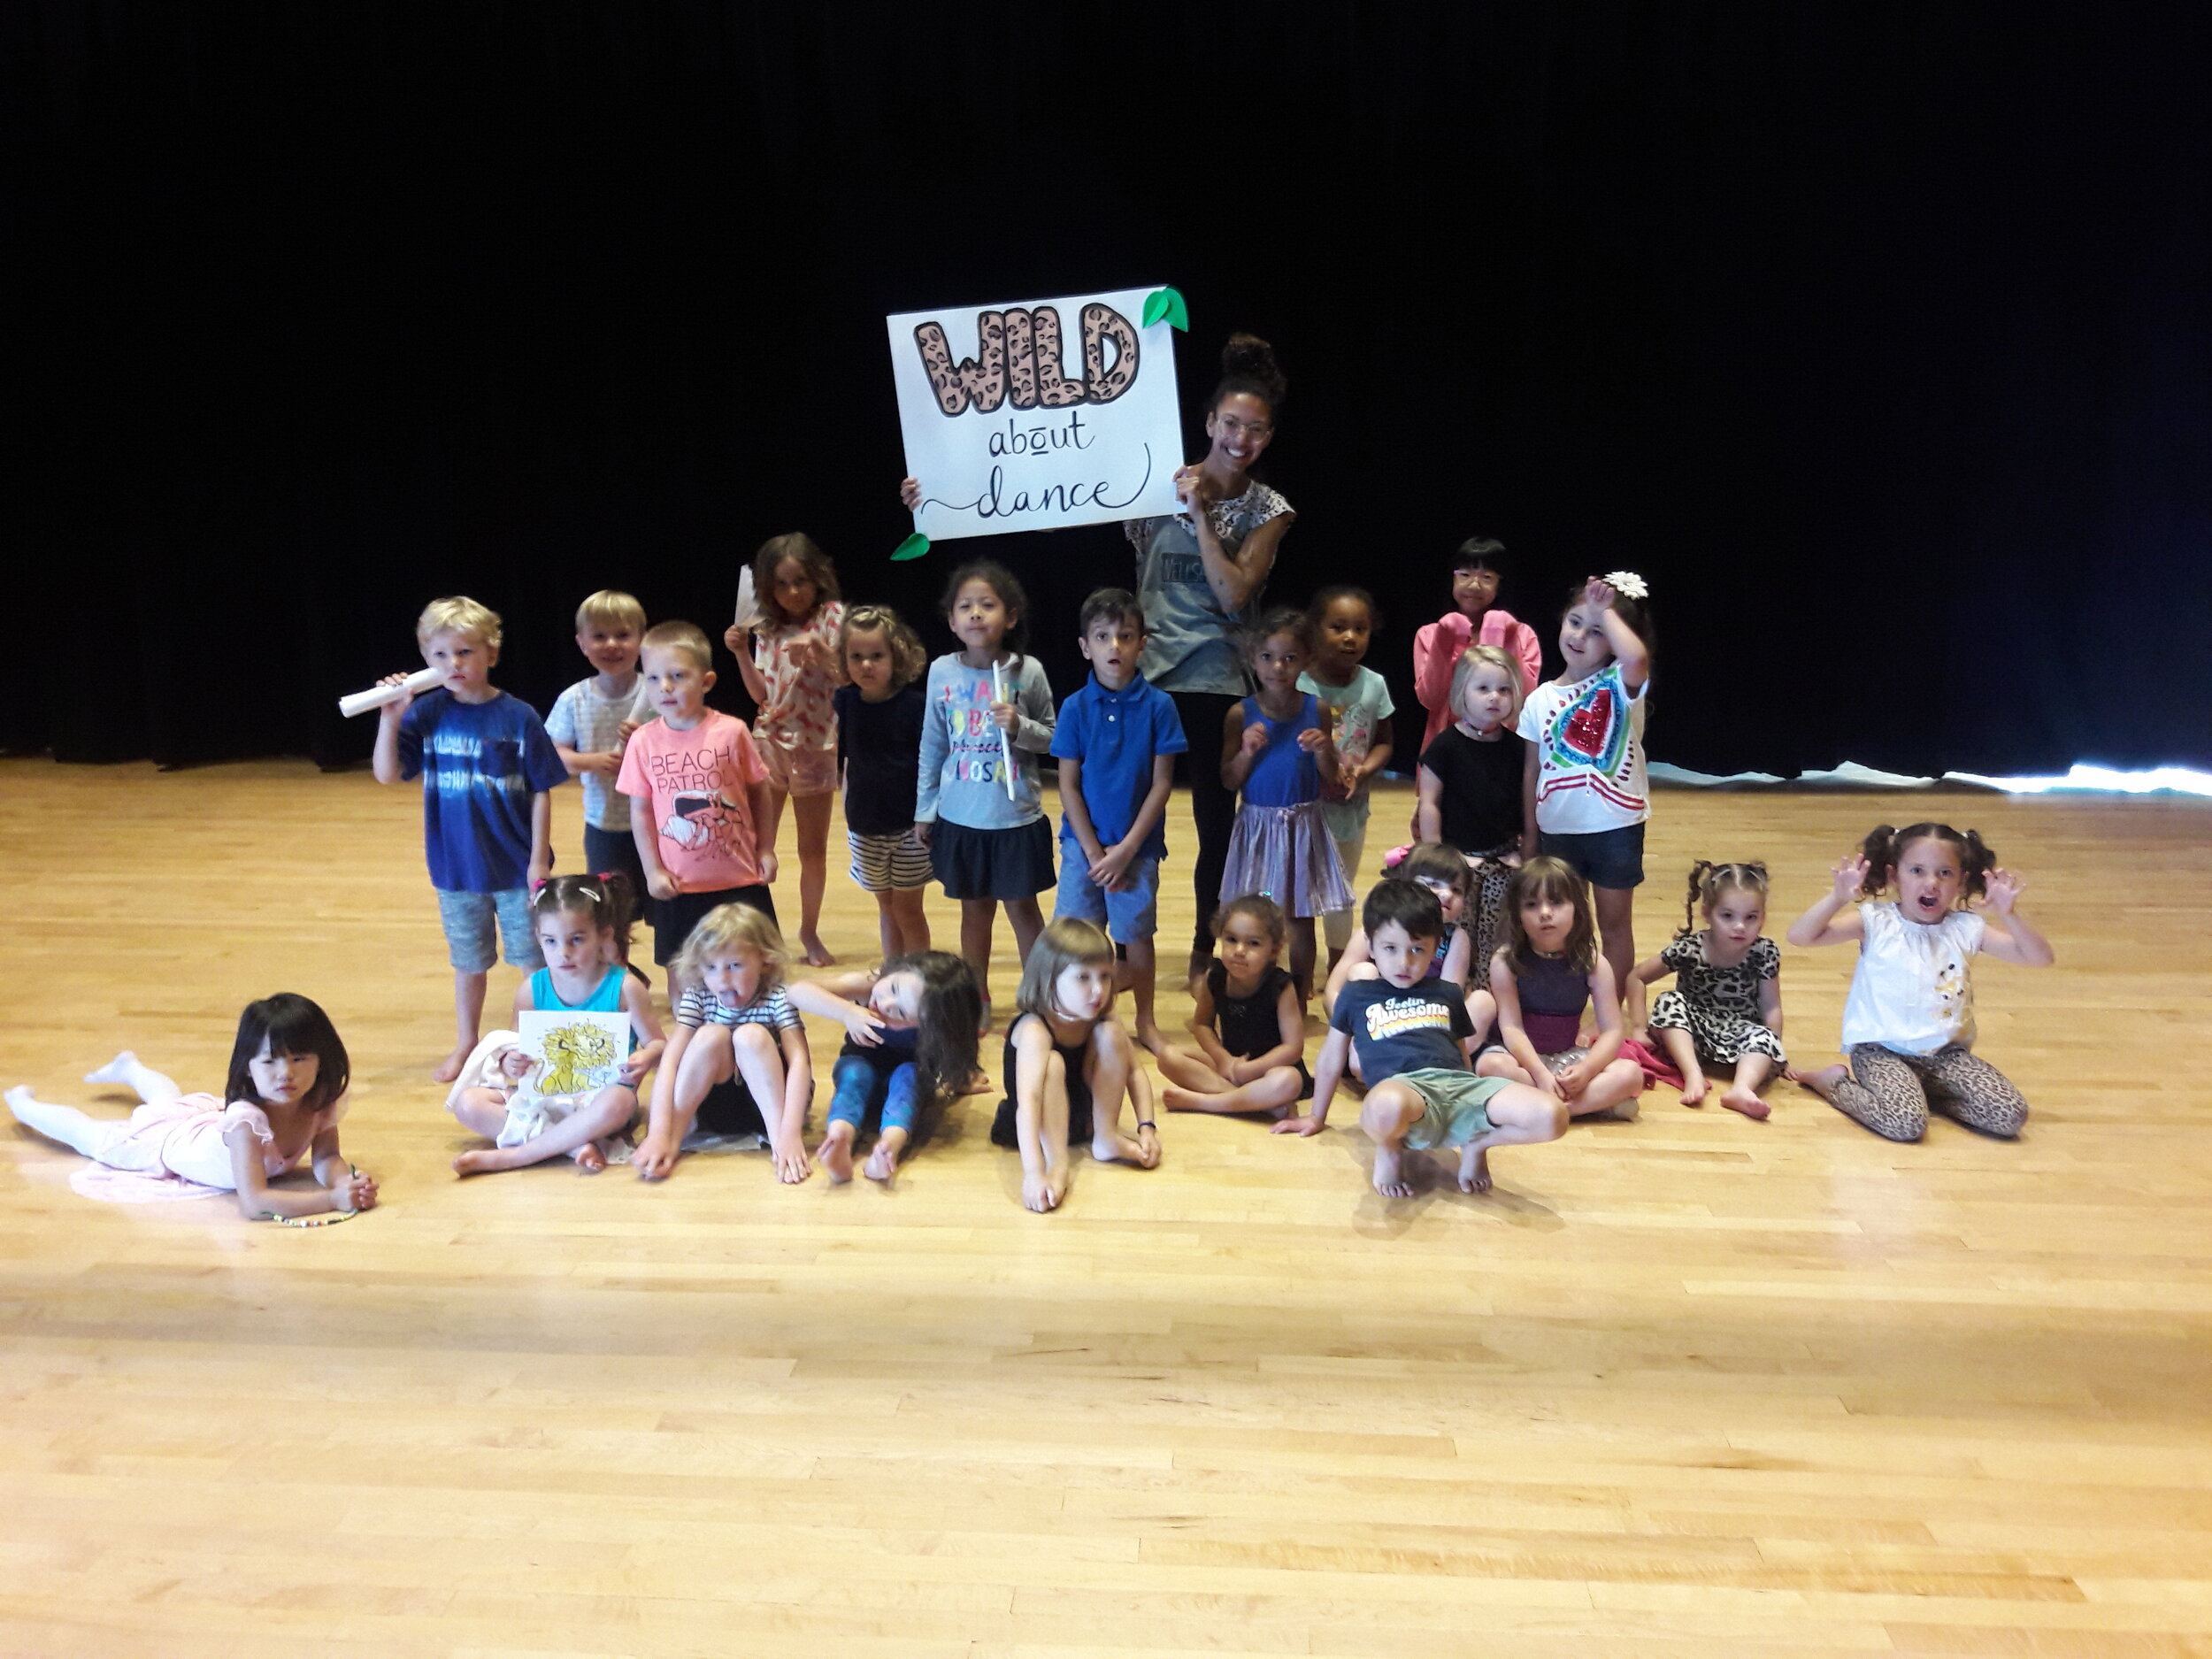 Group photo with students with sign "Wild about Dance"